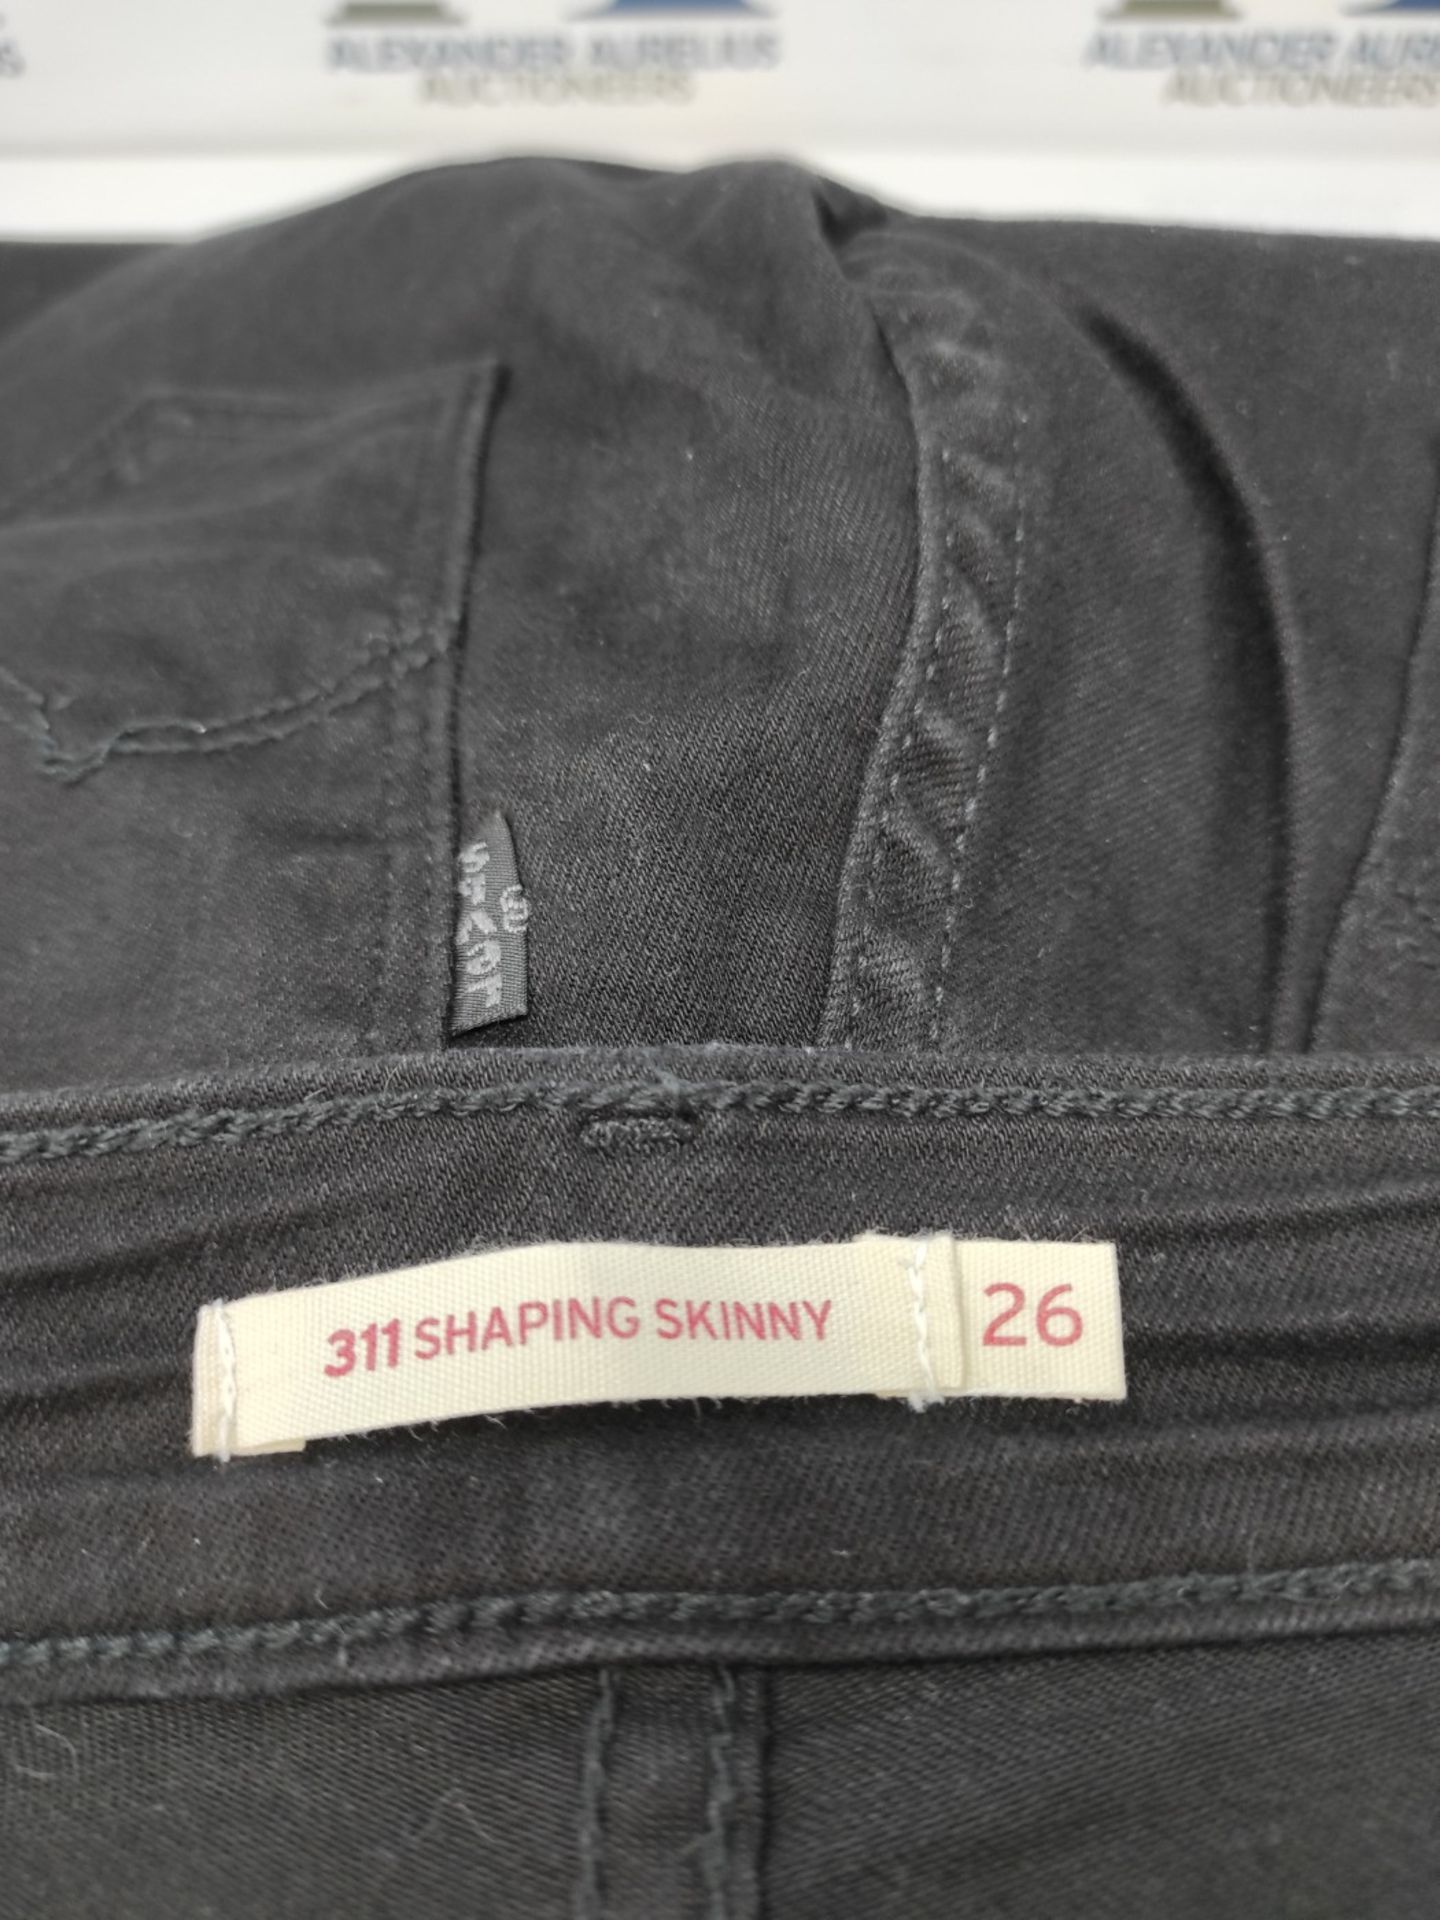 RRP £71.00 Levi's 311 Shaping Skinny Jeans for Women, Black and Black, 26W/30L - Image 6 of 6